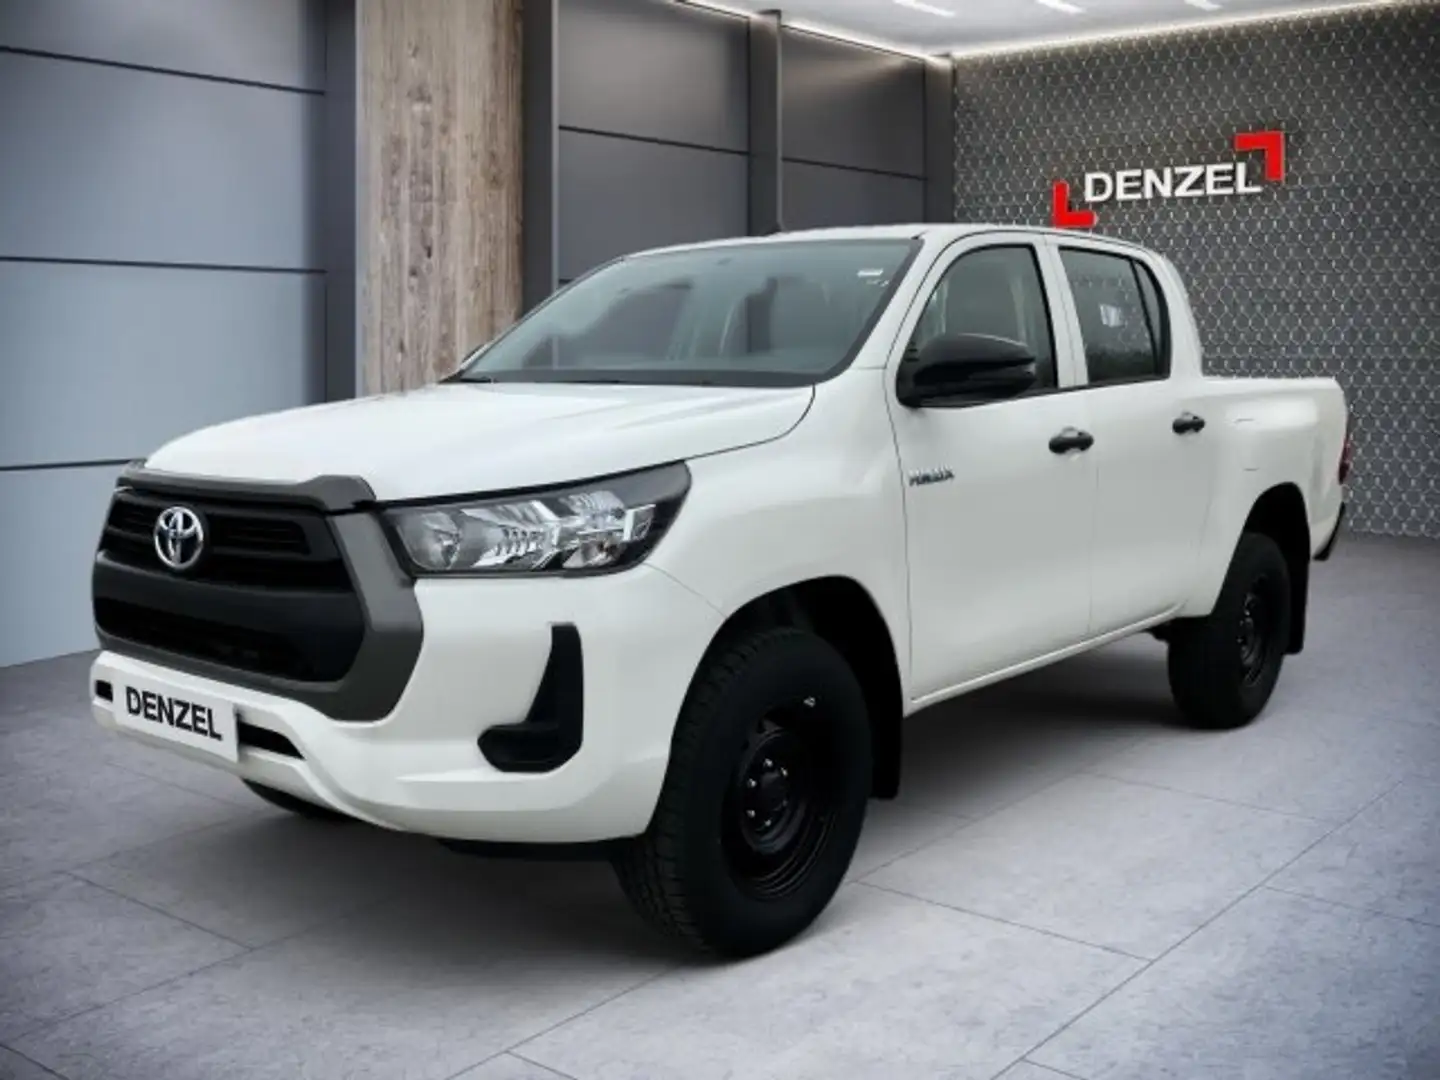 Toyota Hilux 2,4 l Double Cab 6 M/T 4X4 Country Blanc - 1